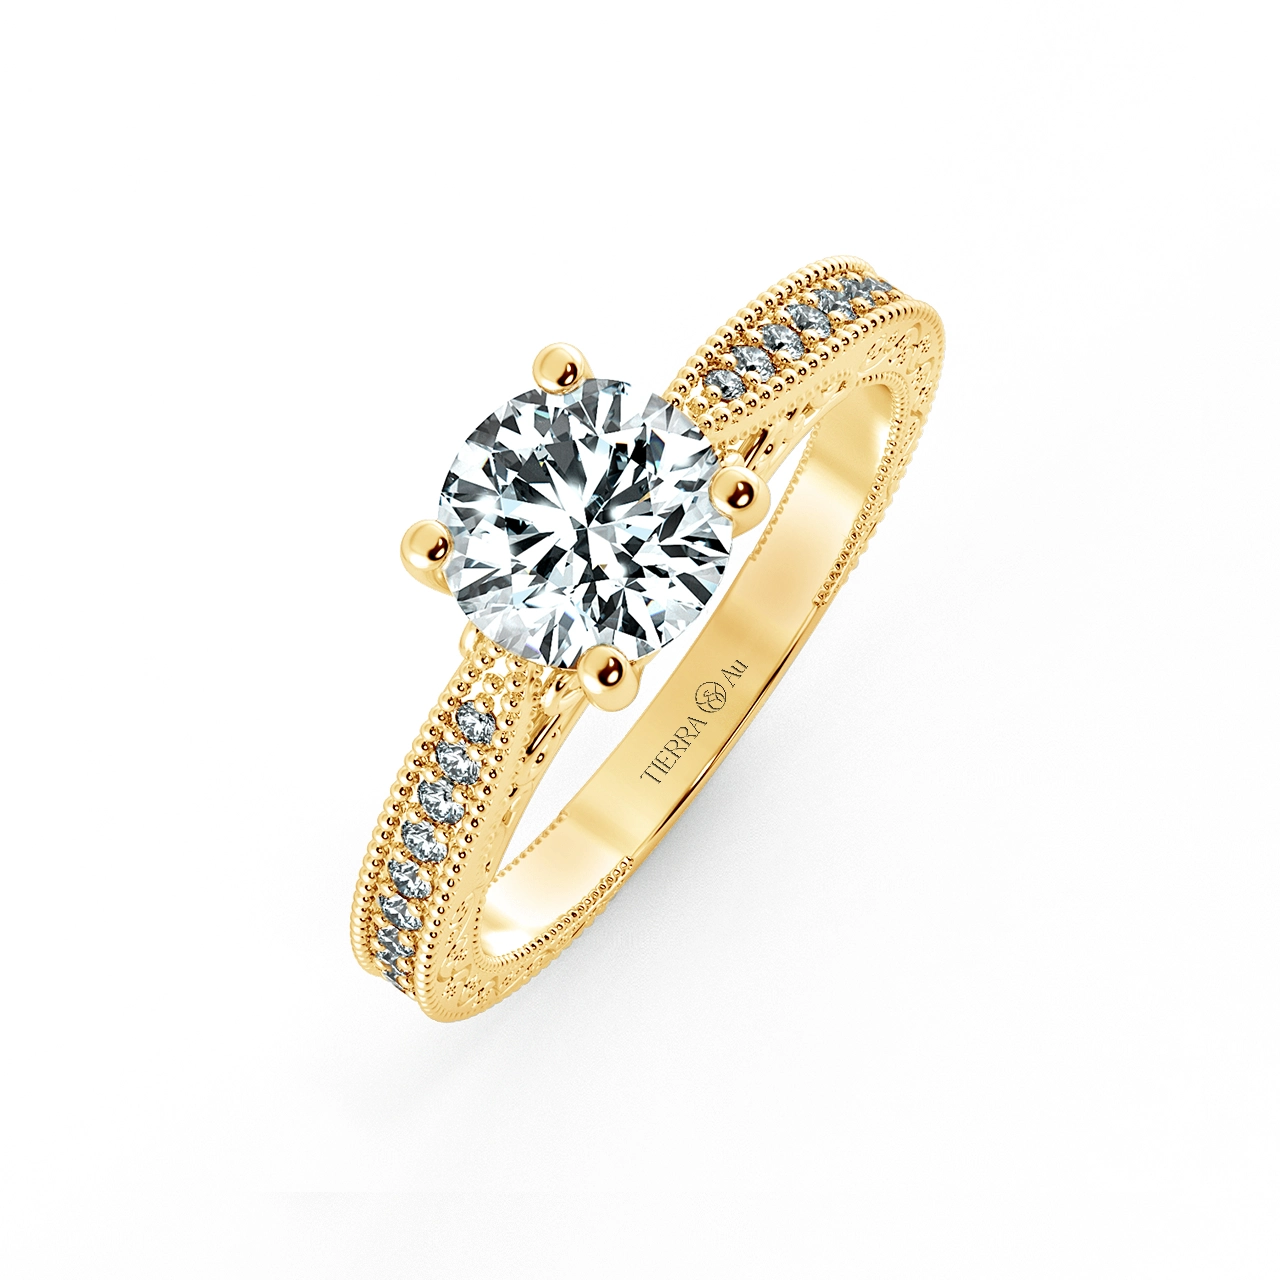 Cathedral Engagement Ring with Pattern Band NCH1506 3